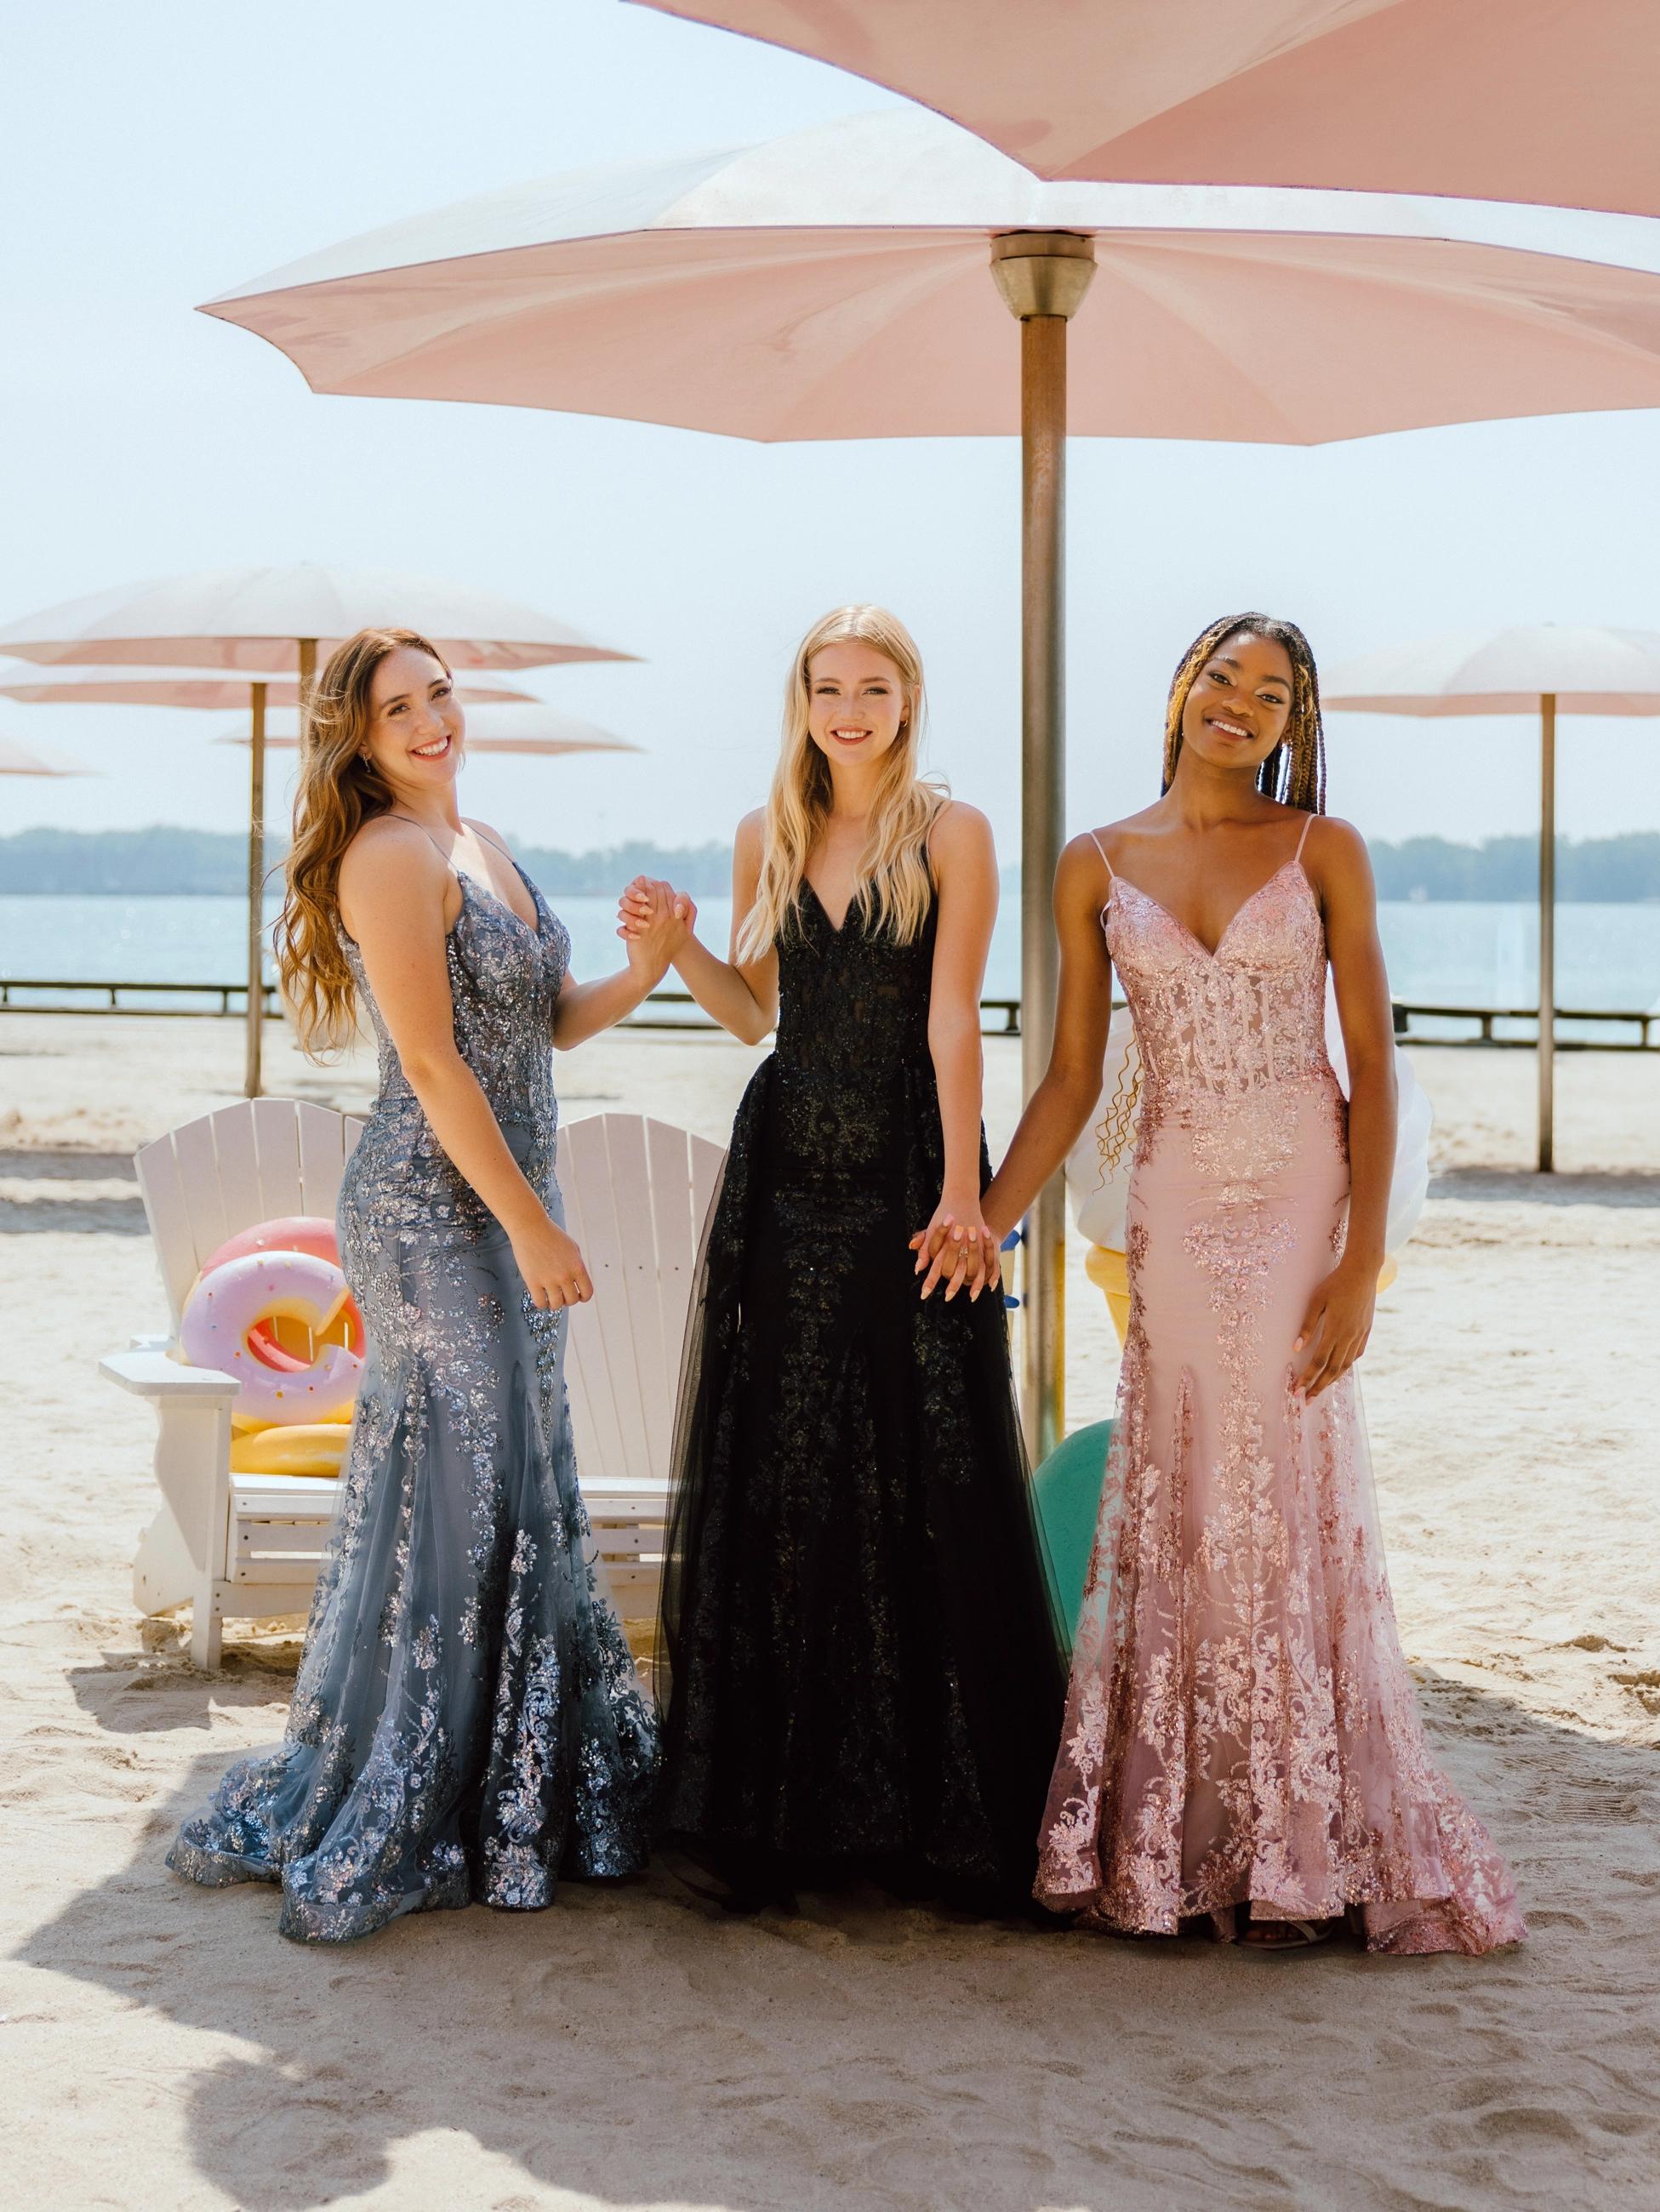 Models wearing a dressess by Candy Prom